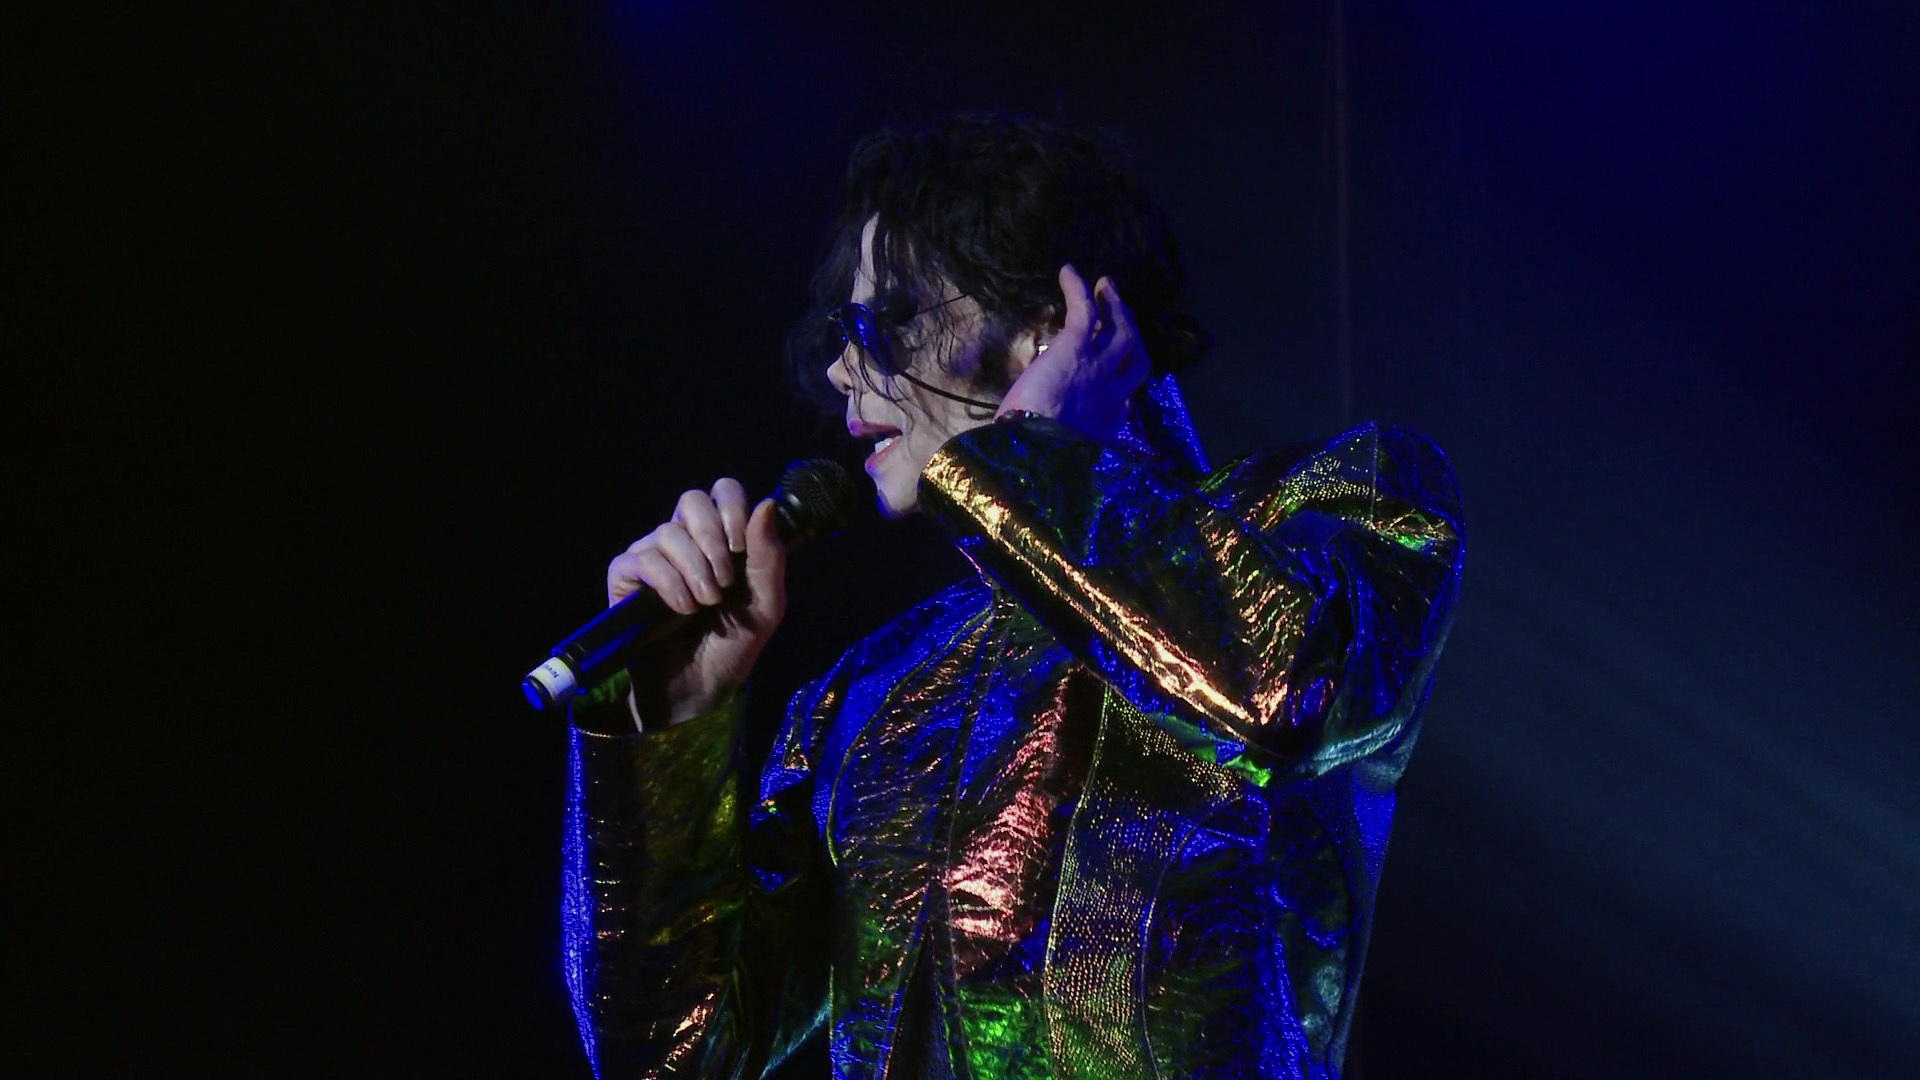 Michael in This Is It--Shiny jacket